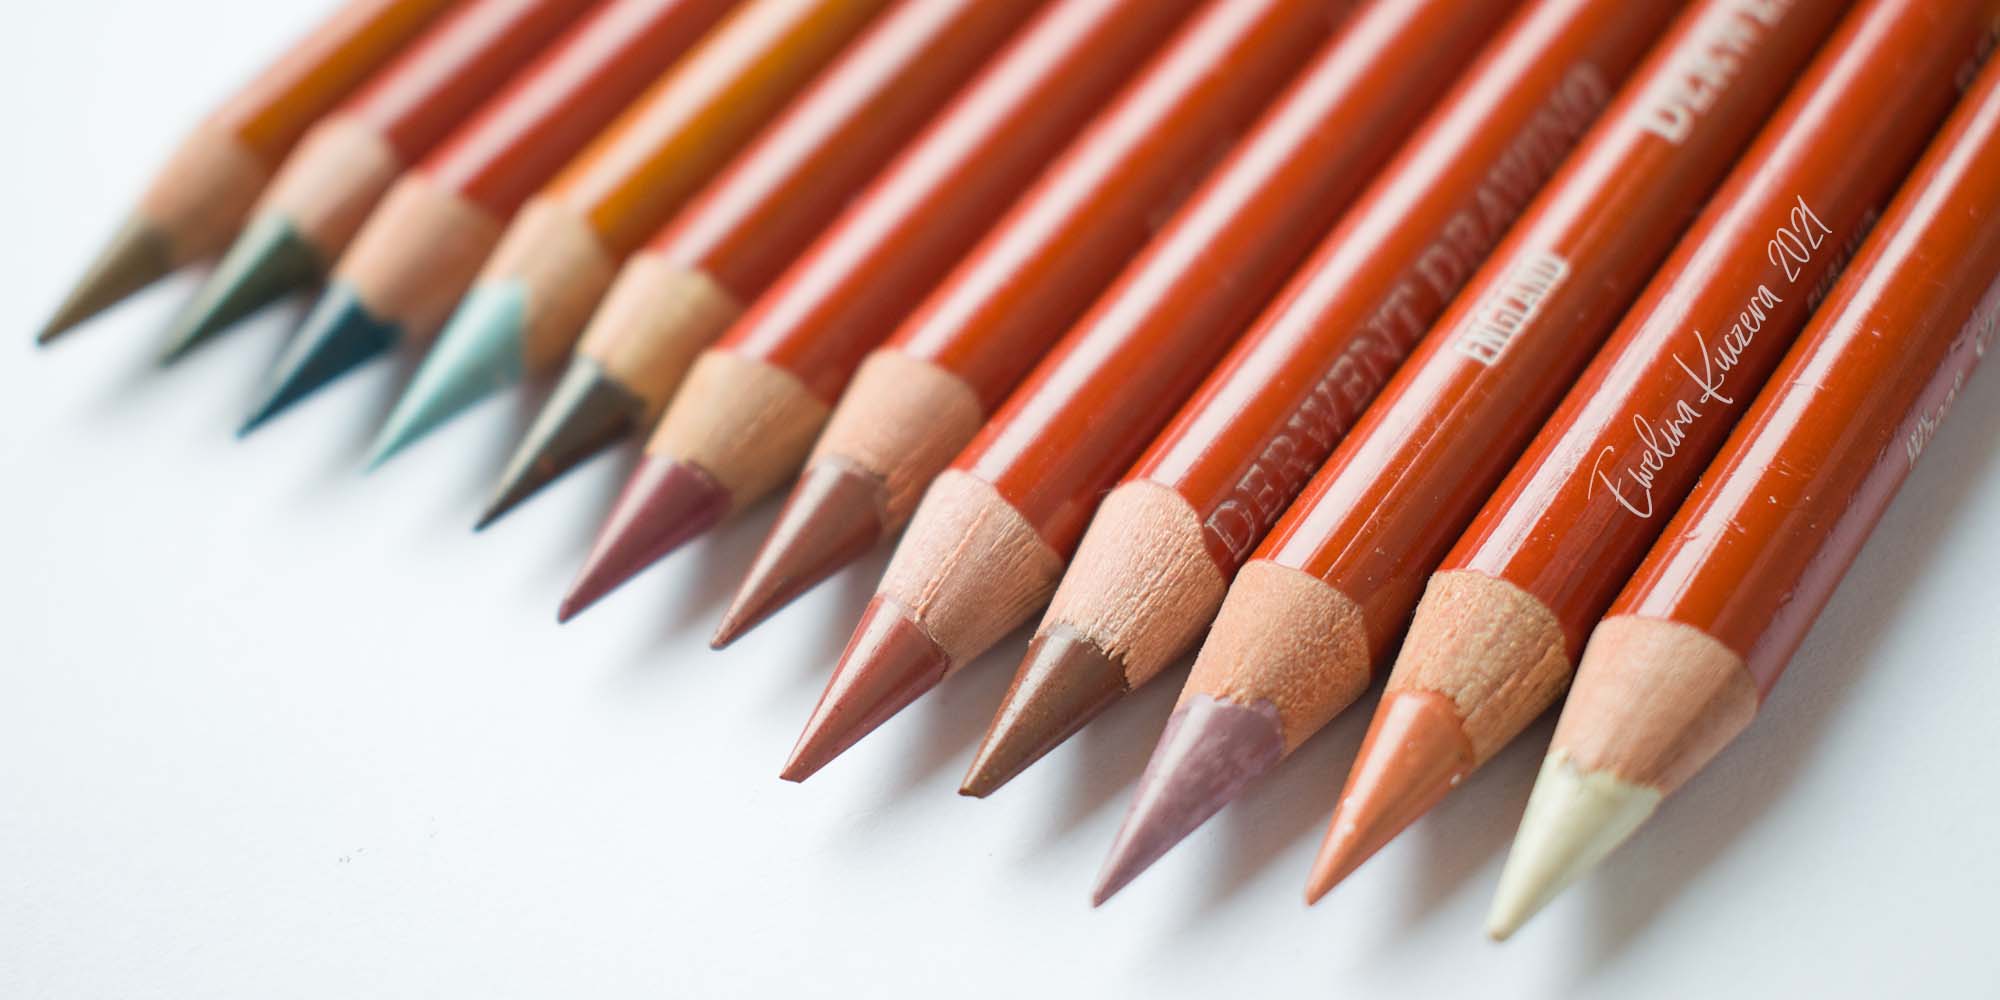 Artistic Blog - learn how to draw with colored pencils: Derwent Drawing  colored pencils - Review